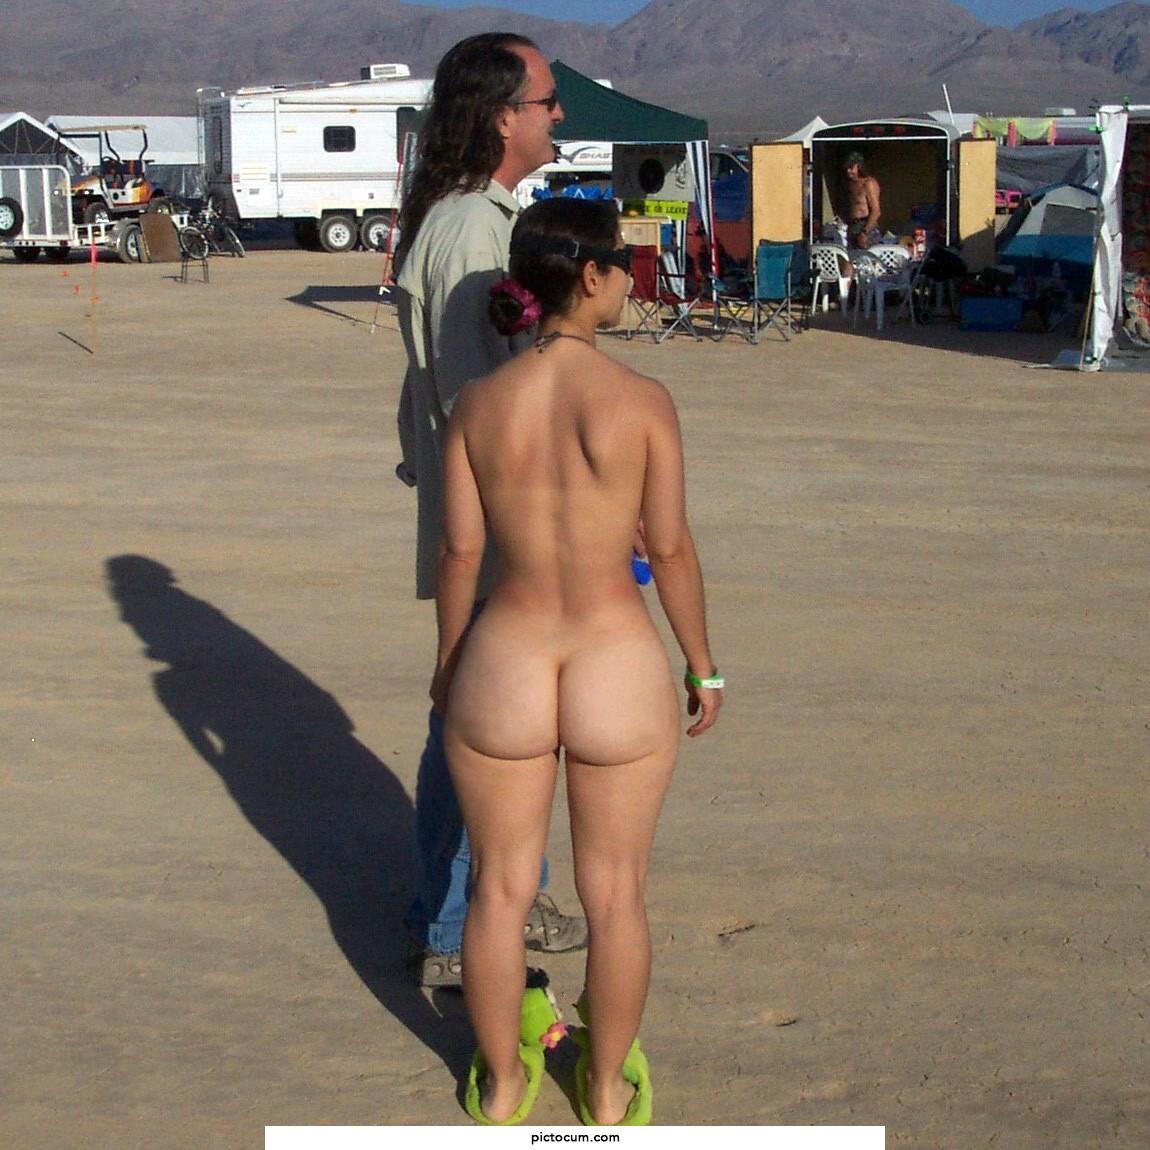 Do Burning Man Sluts With Fat Asses Count?